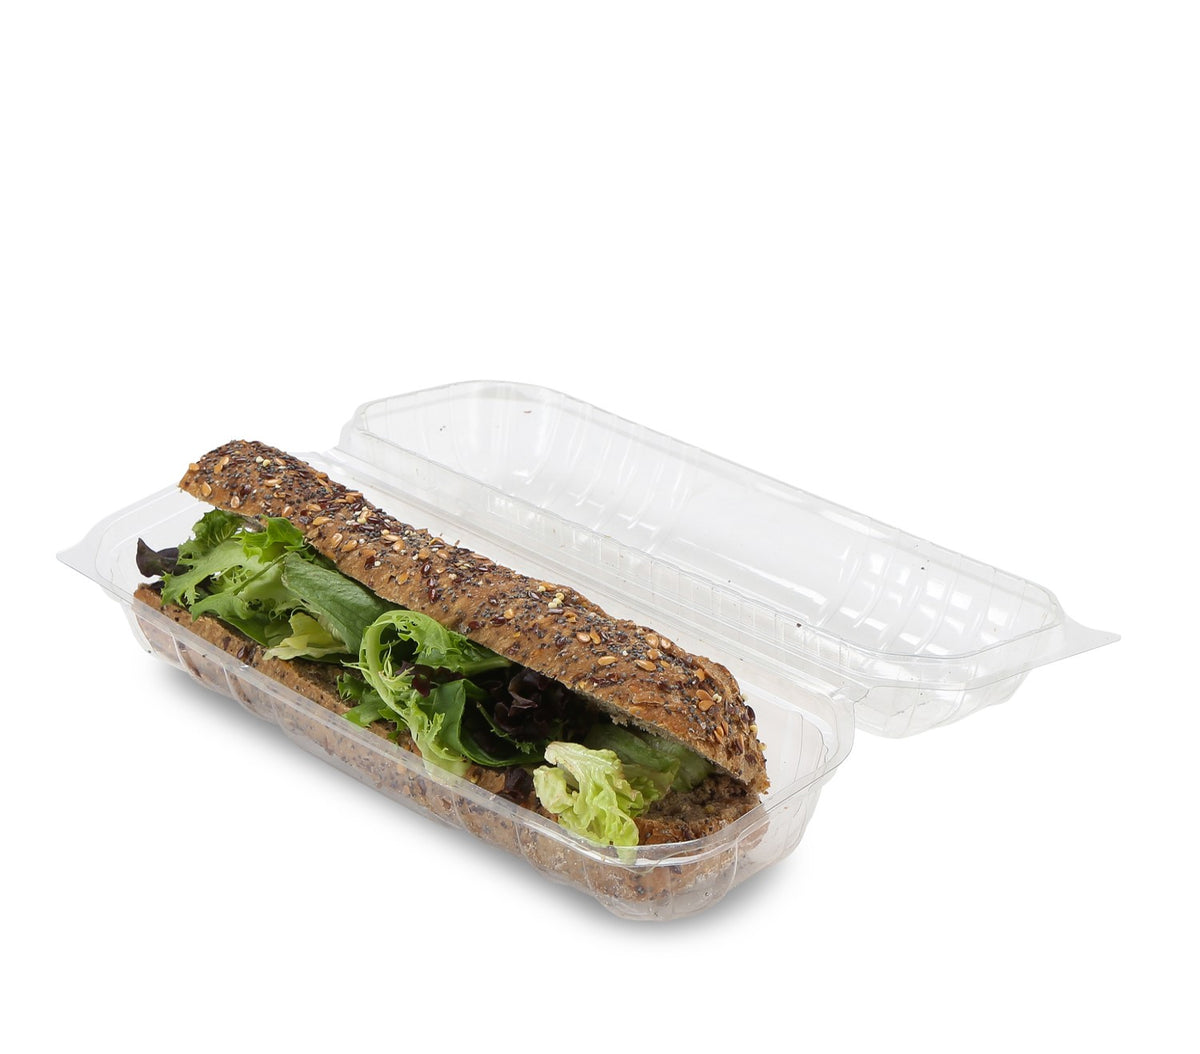 50 x 9" Hinged Lid Baguette Boxes - 245mm x 90mm x 65mm Deep - Great For Paninis Too!